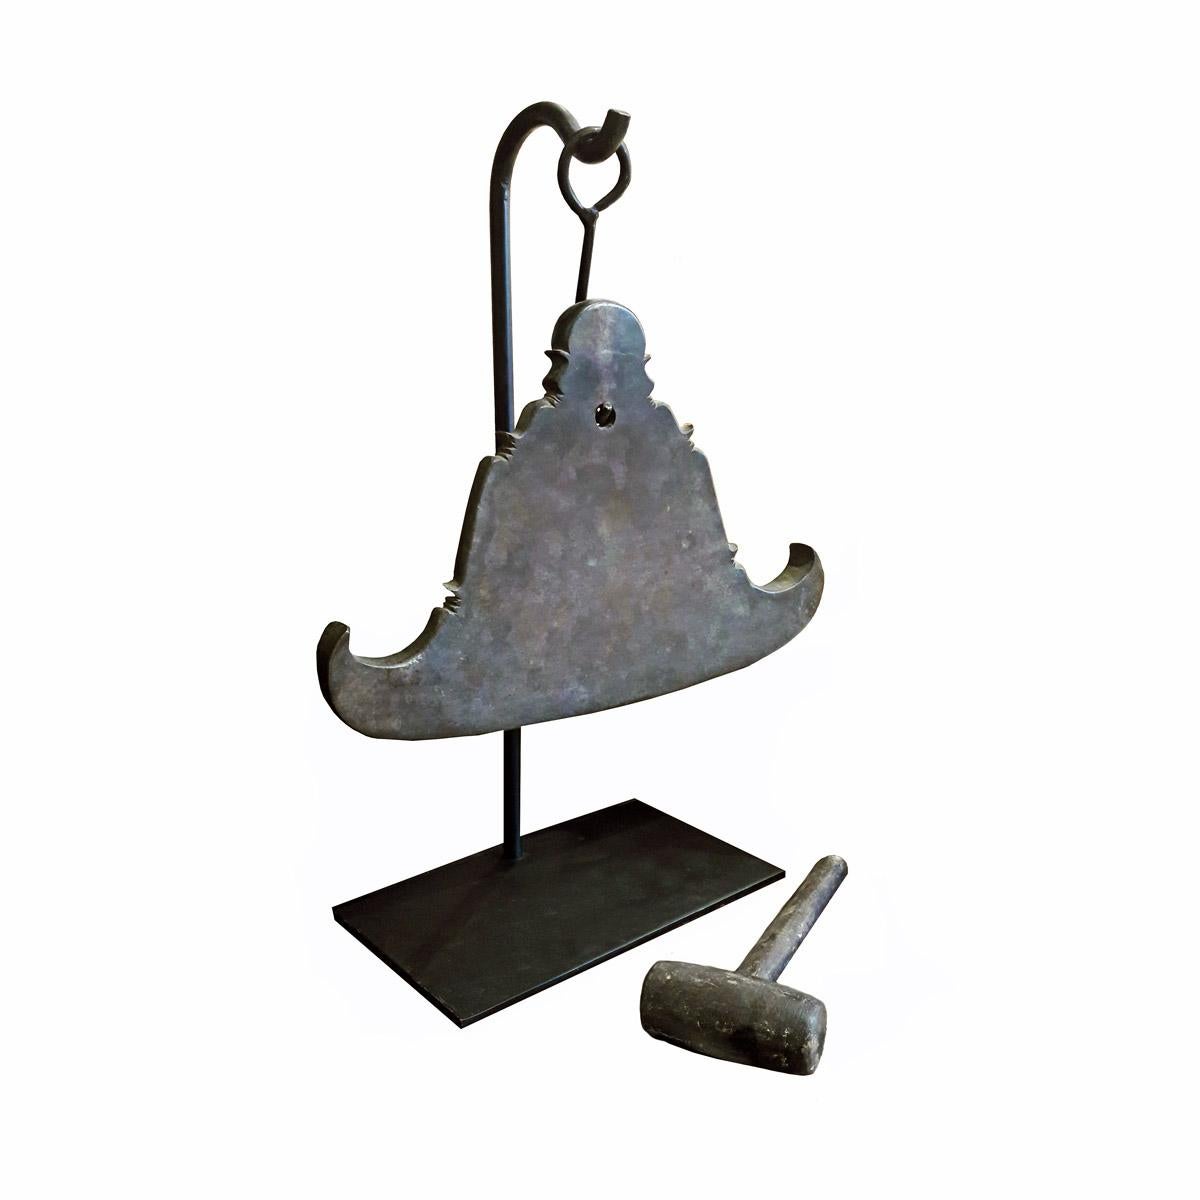 A Burmese gong from a Buddhist temple, circa 1950. Made of solid cast bronze in the shape of a temple or pagoda. Mounted on a black metal Stand. Includes its original wood mallet, which produces a deep, harmonious sound. 

9